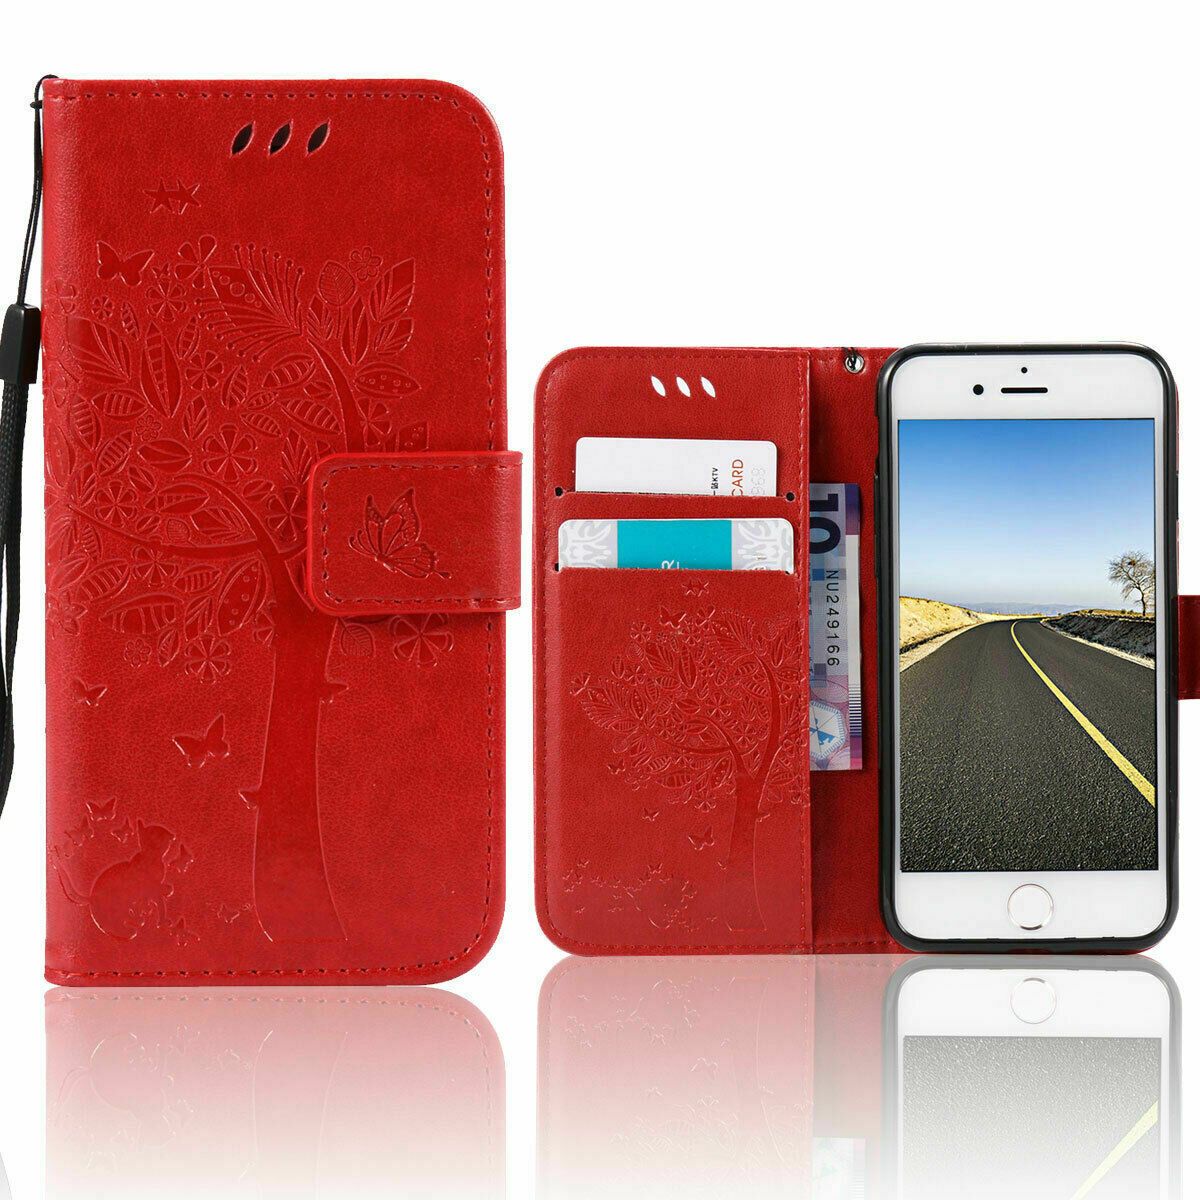 Magnetic Leather Wallet Case For iPhone 8 7 6s Plus X XS MAX XR Flip Cover Stand stekim-92 Red iPhone6/6S 